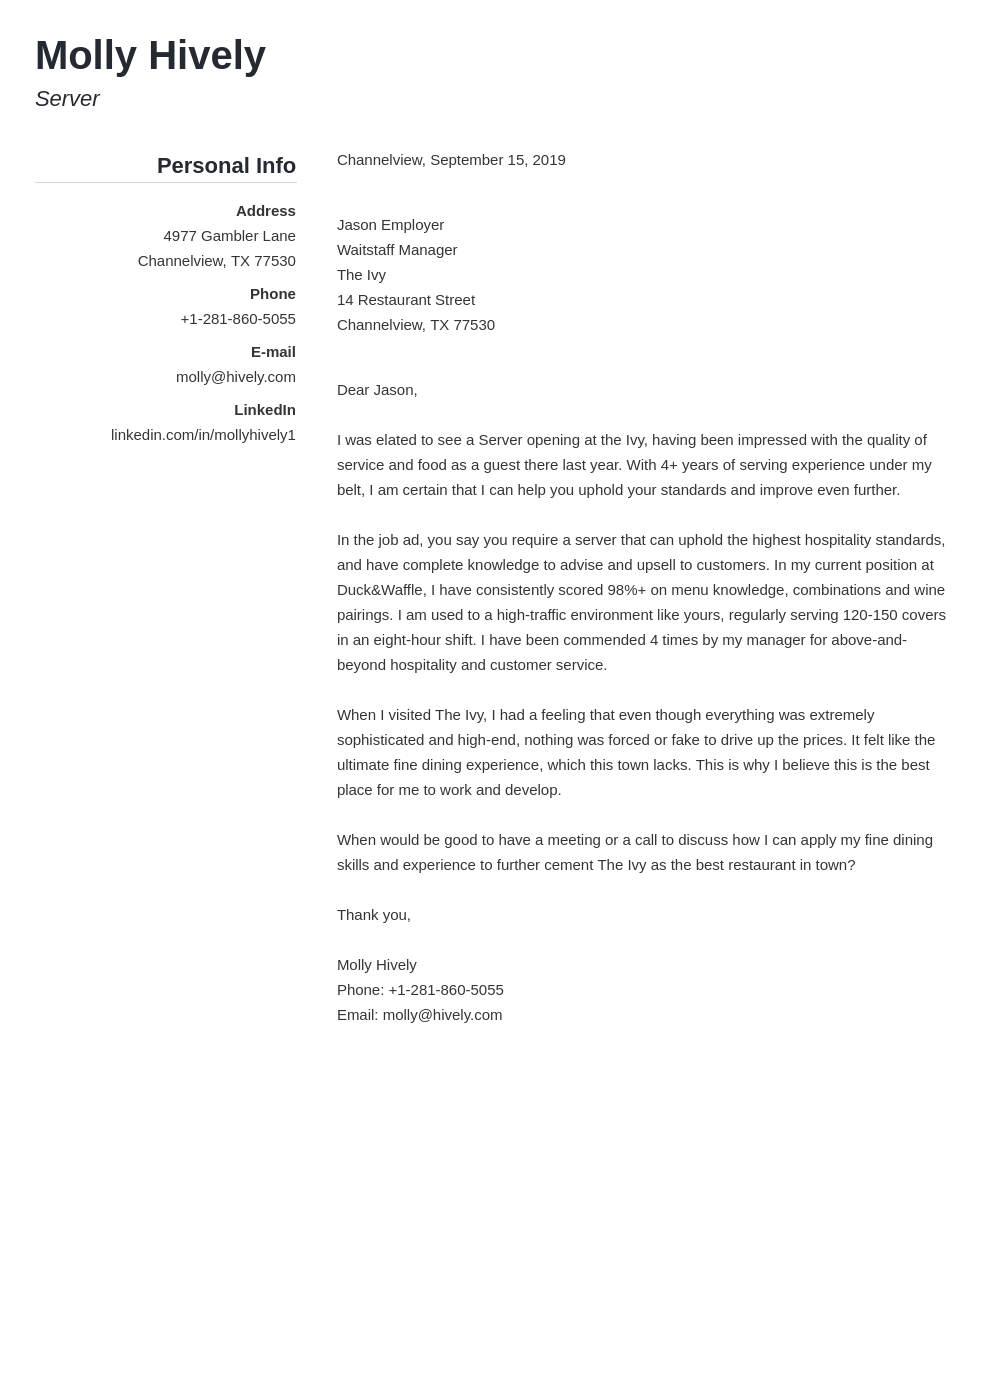 Server Cover Letter: Examples & Ready-To-Use Template